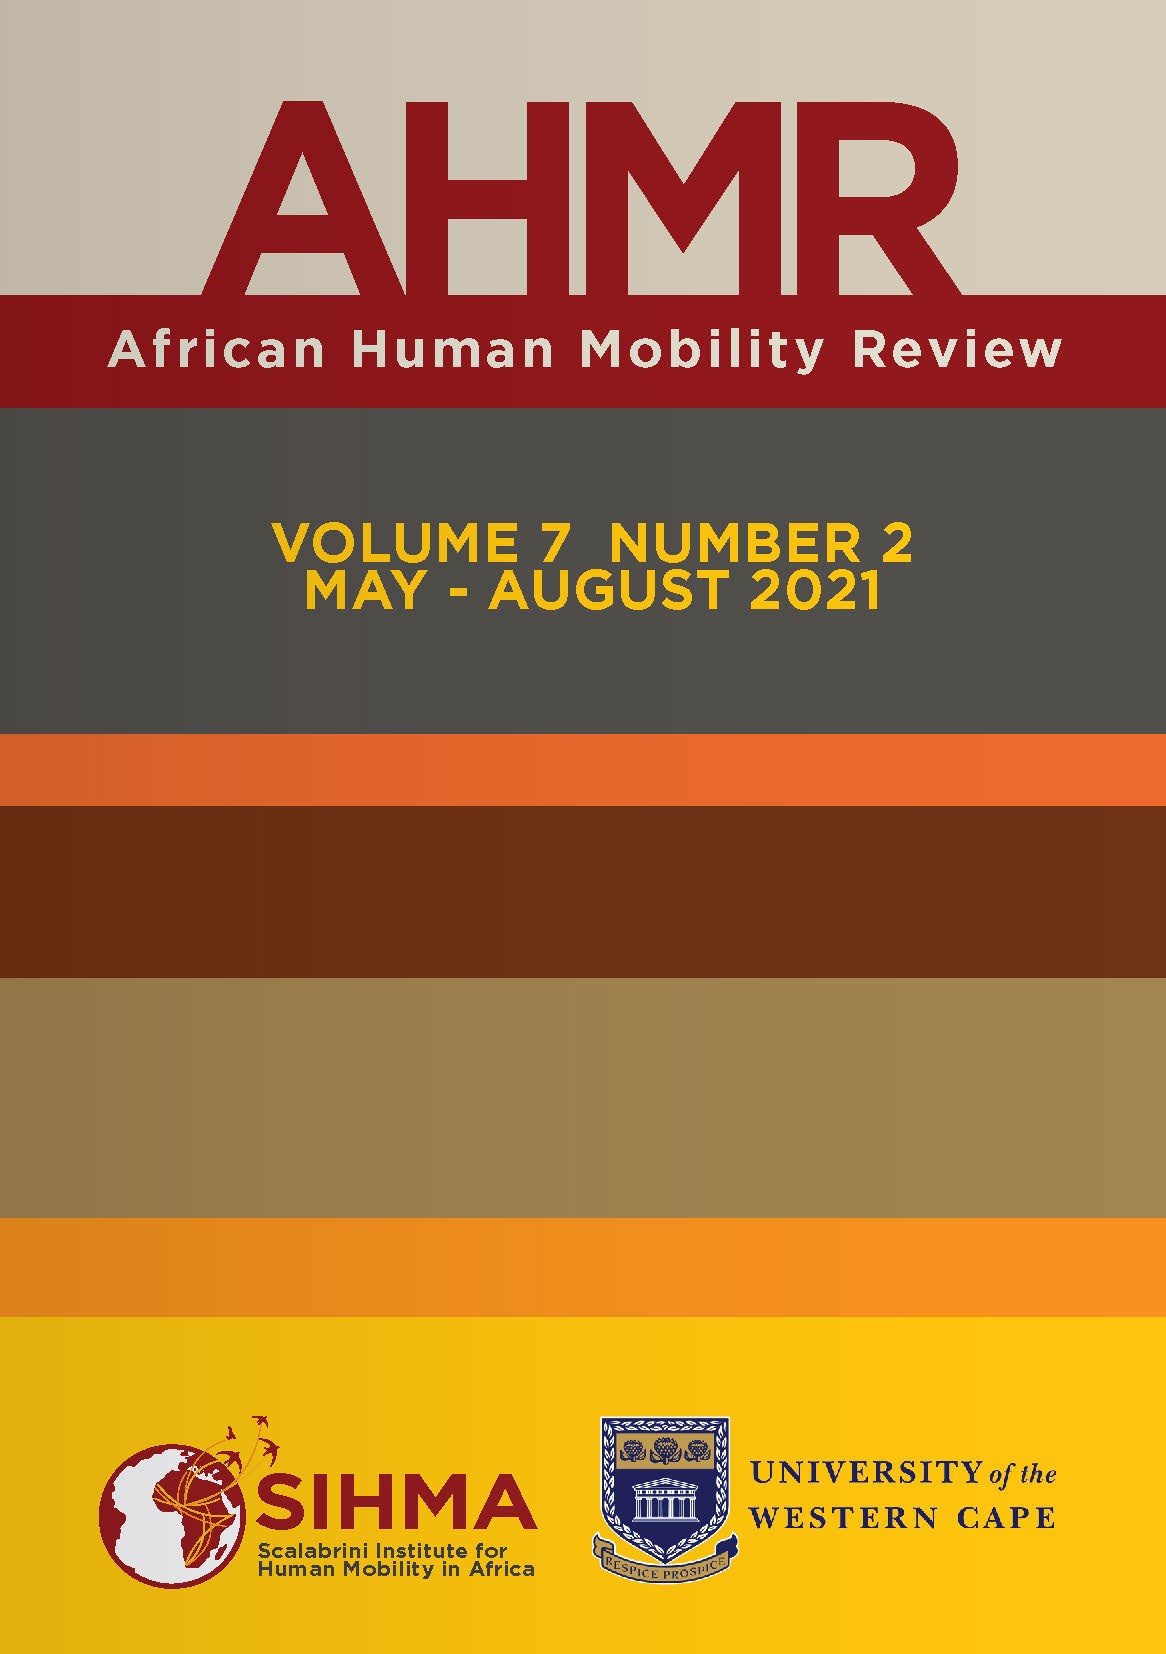 https://www.sihma.org.za/photos/shares/AHMR COVER ONLINE volume 7 number 2.jpg